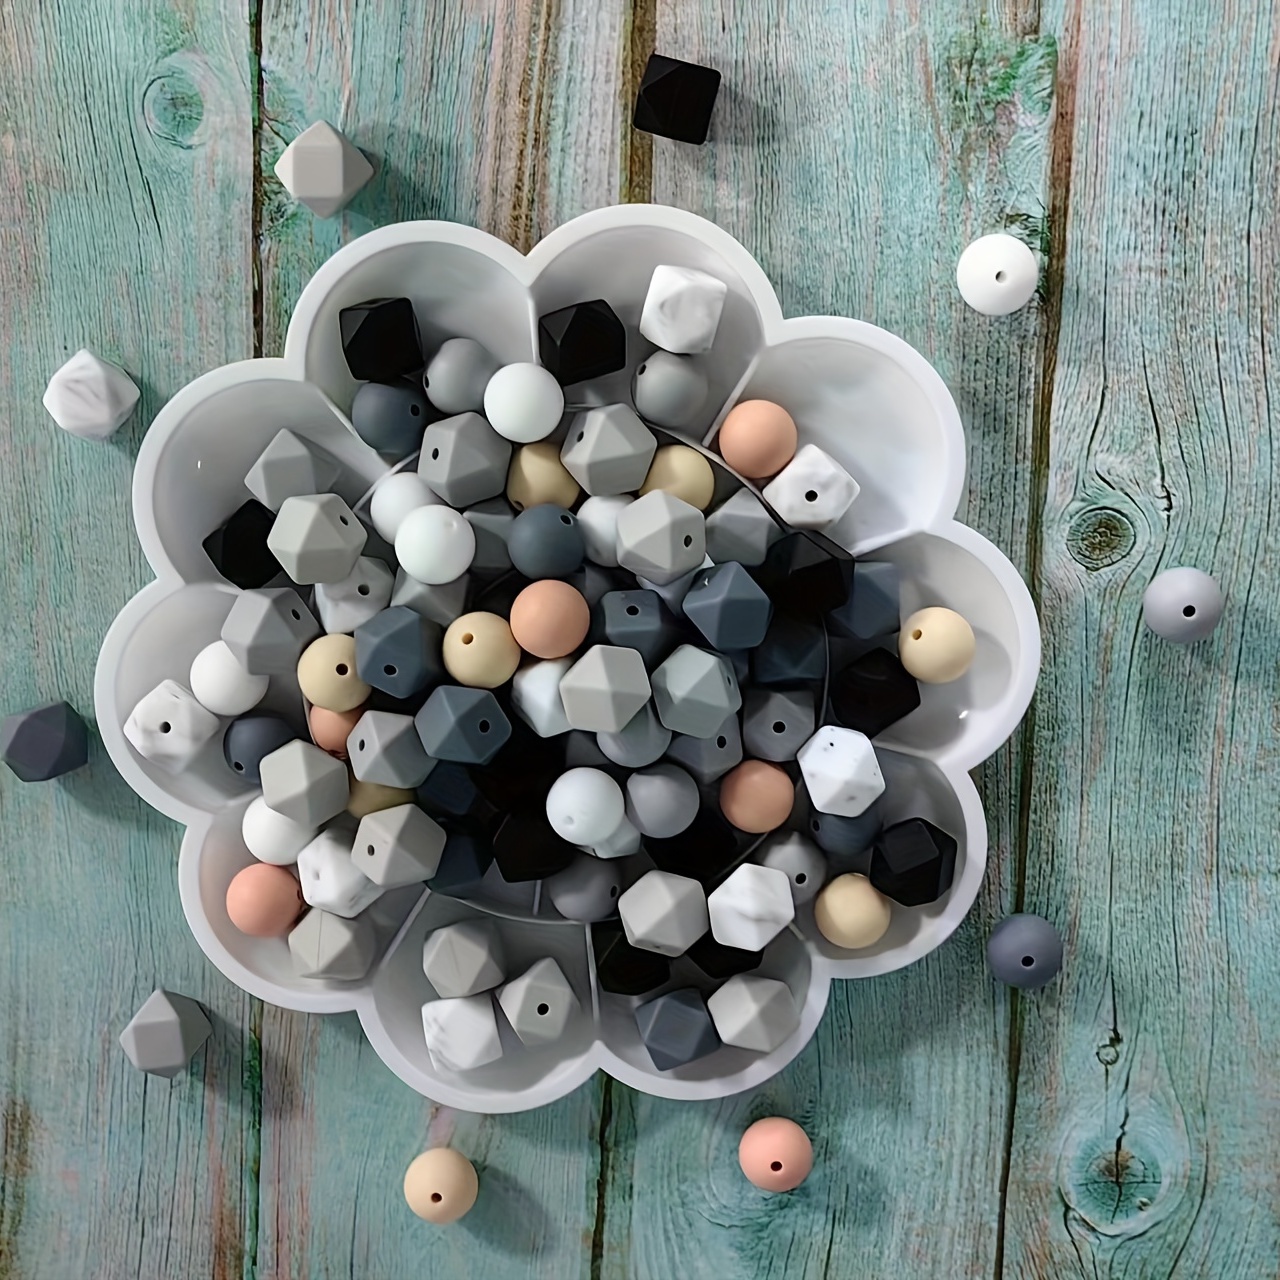 15mm Grey Silicone Beads, Gray Round Silicone Beads, Beads Wholesale